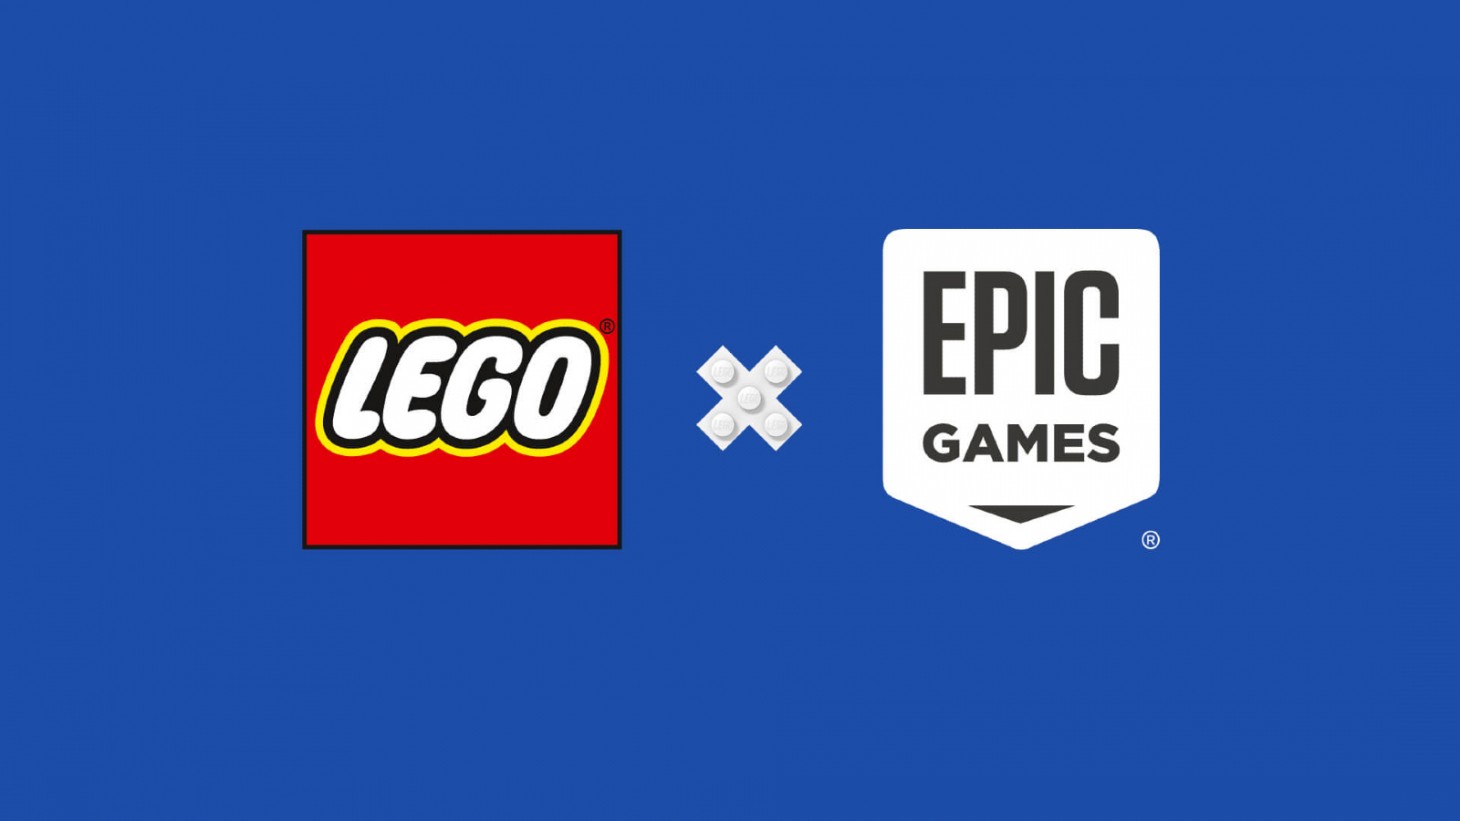 Lego And Epic Games Begin Partnership To Make The Metaverse ‘Safe And Fun For Children’